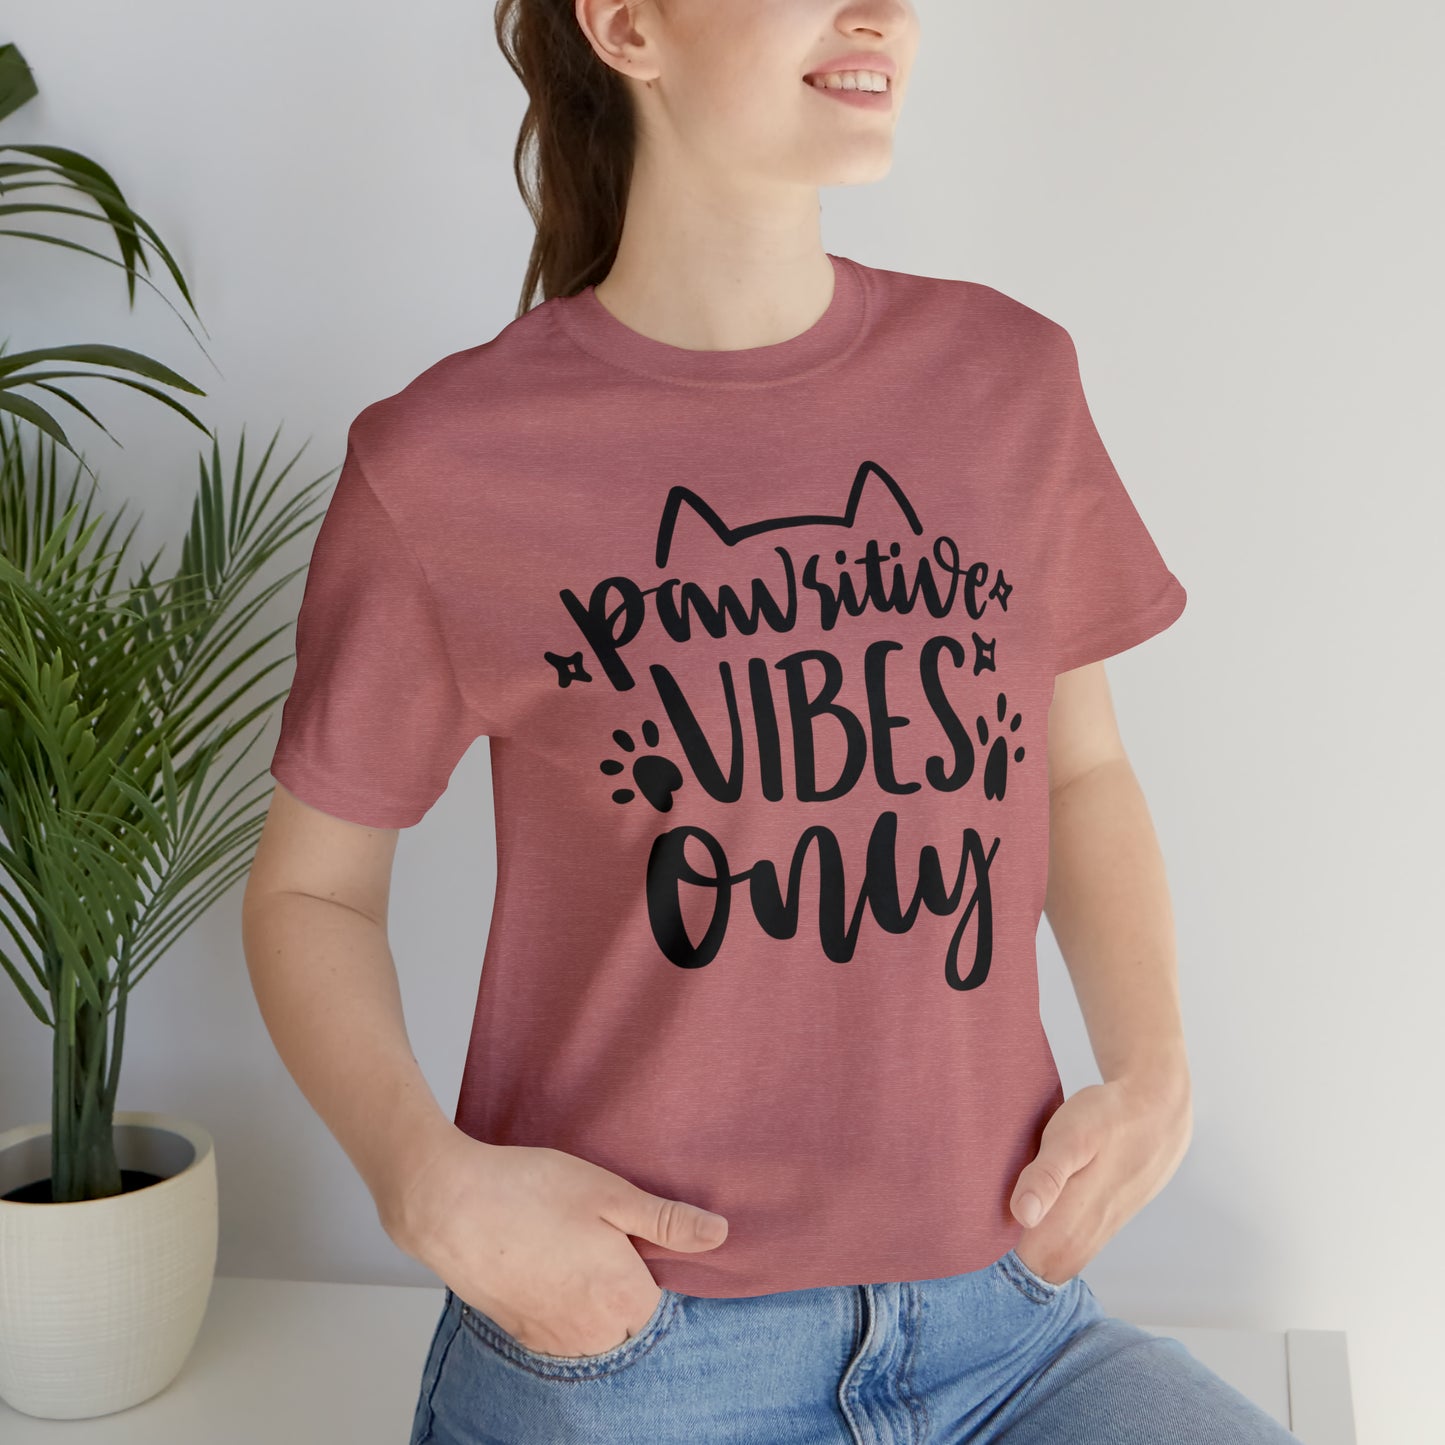 Pawsitive Vibes Only Cat Short Sleeve T-shirt